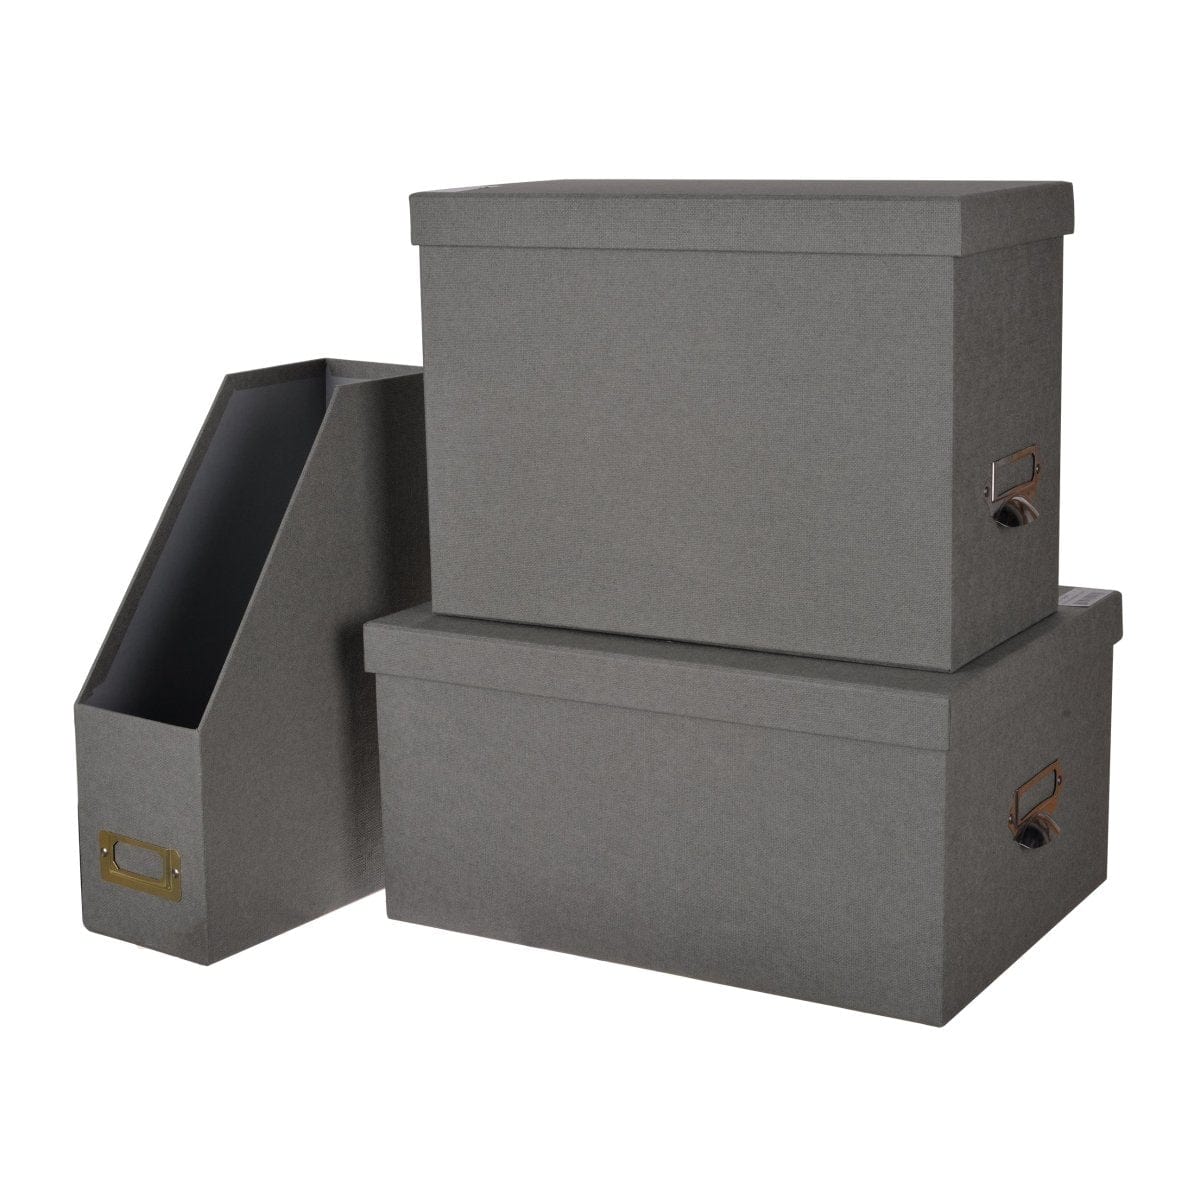 AB-42027 GRAY S/3 ISMAY OFFICE STORAGE BOXES &amp; FILE picket and rail